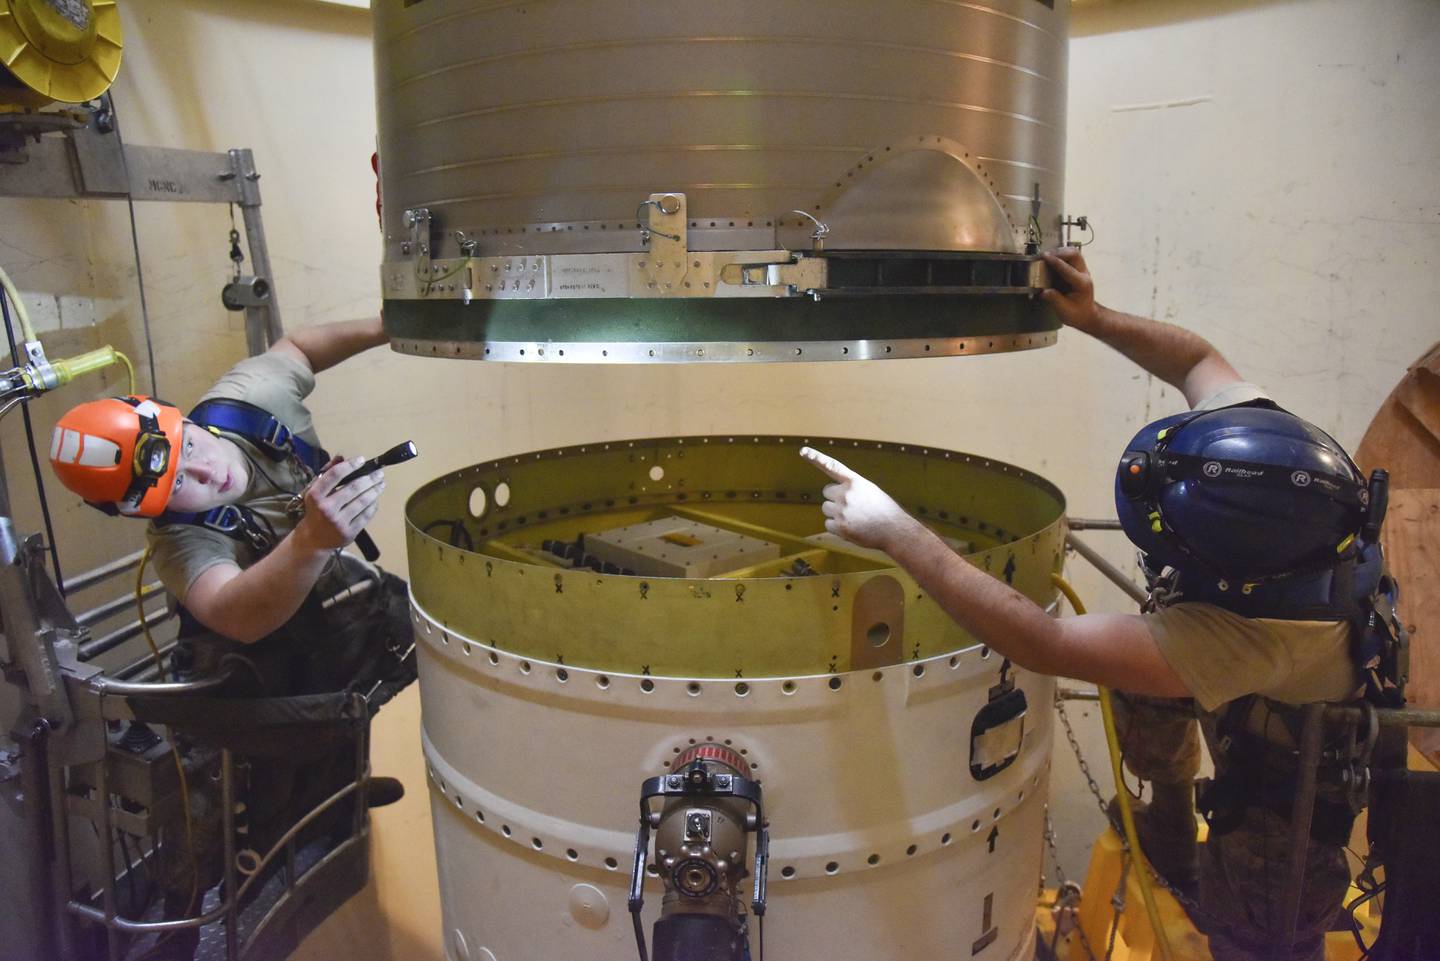 In this image provided by the U.S. Air Force, Airman 1st Class Jackson Ligon, left, and Senior Airman Jonathan Marinaccio, 341st Missile Maintenance Squadron technicians connect a re-entry system to a spacer on an intercontinental ballistic missile during a Simulated Electronic Launch-Minuteman test Sept. 22, 2020, at a launch facility near Malmstrom Air Force Base in Great Falls, Mont.